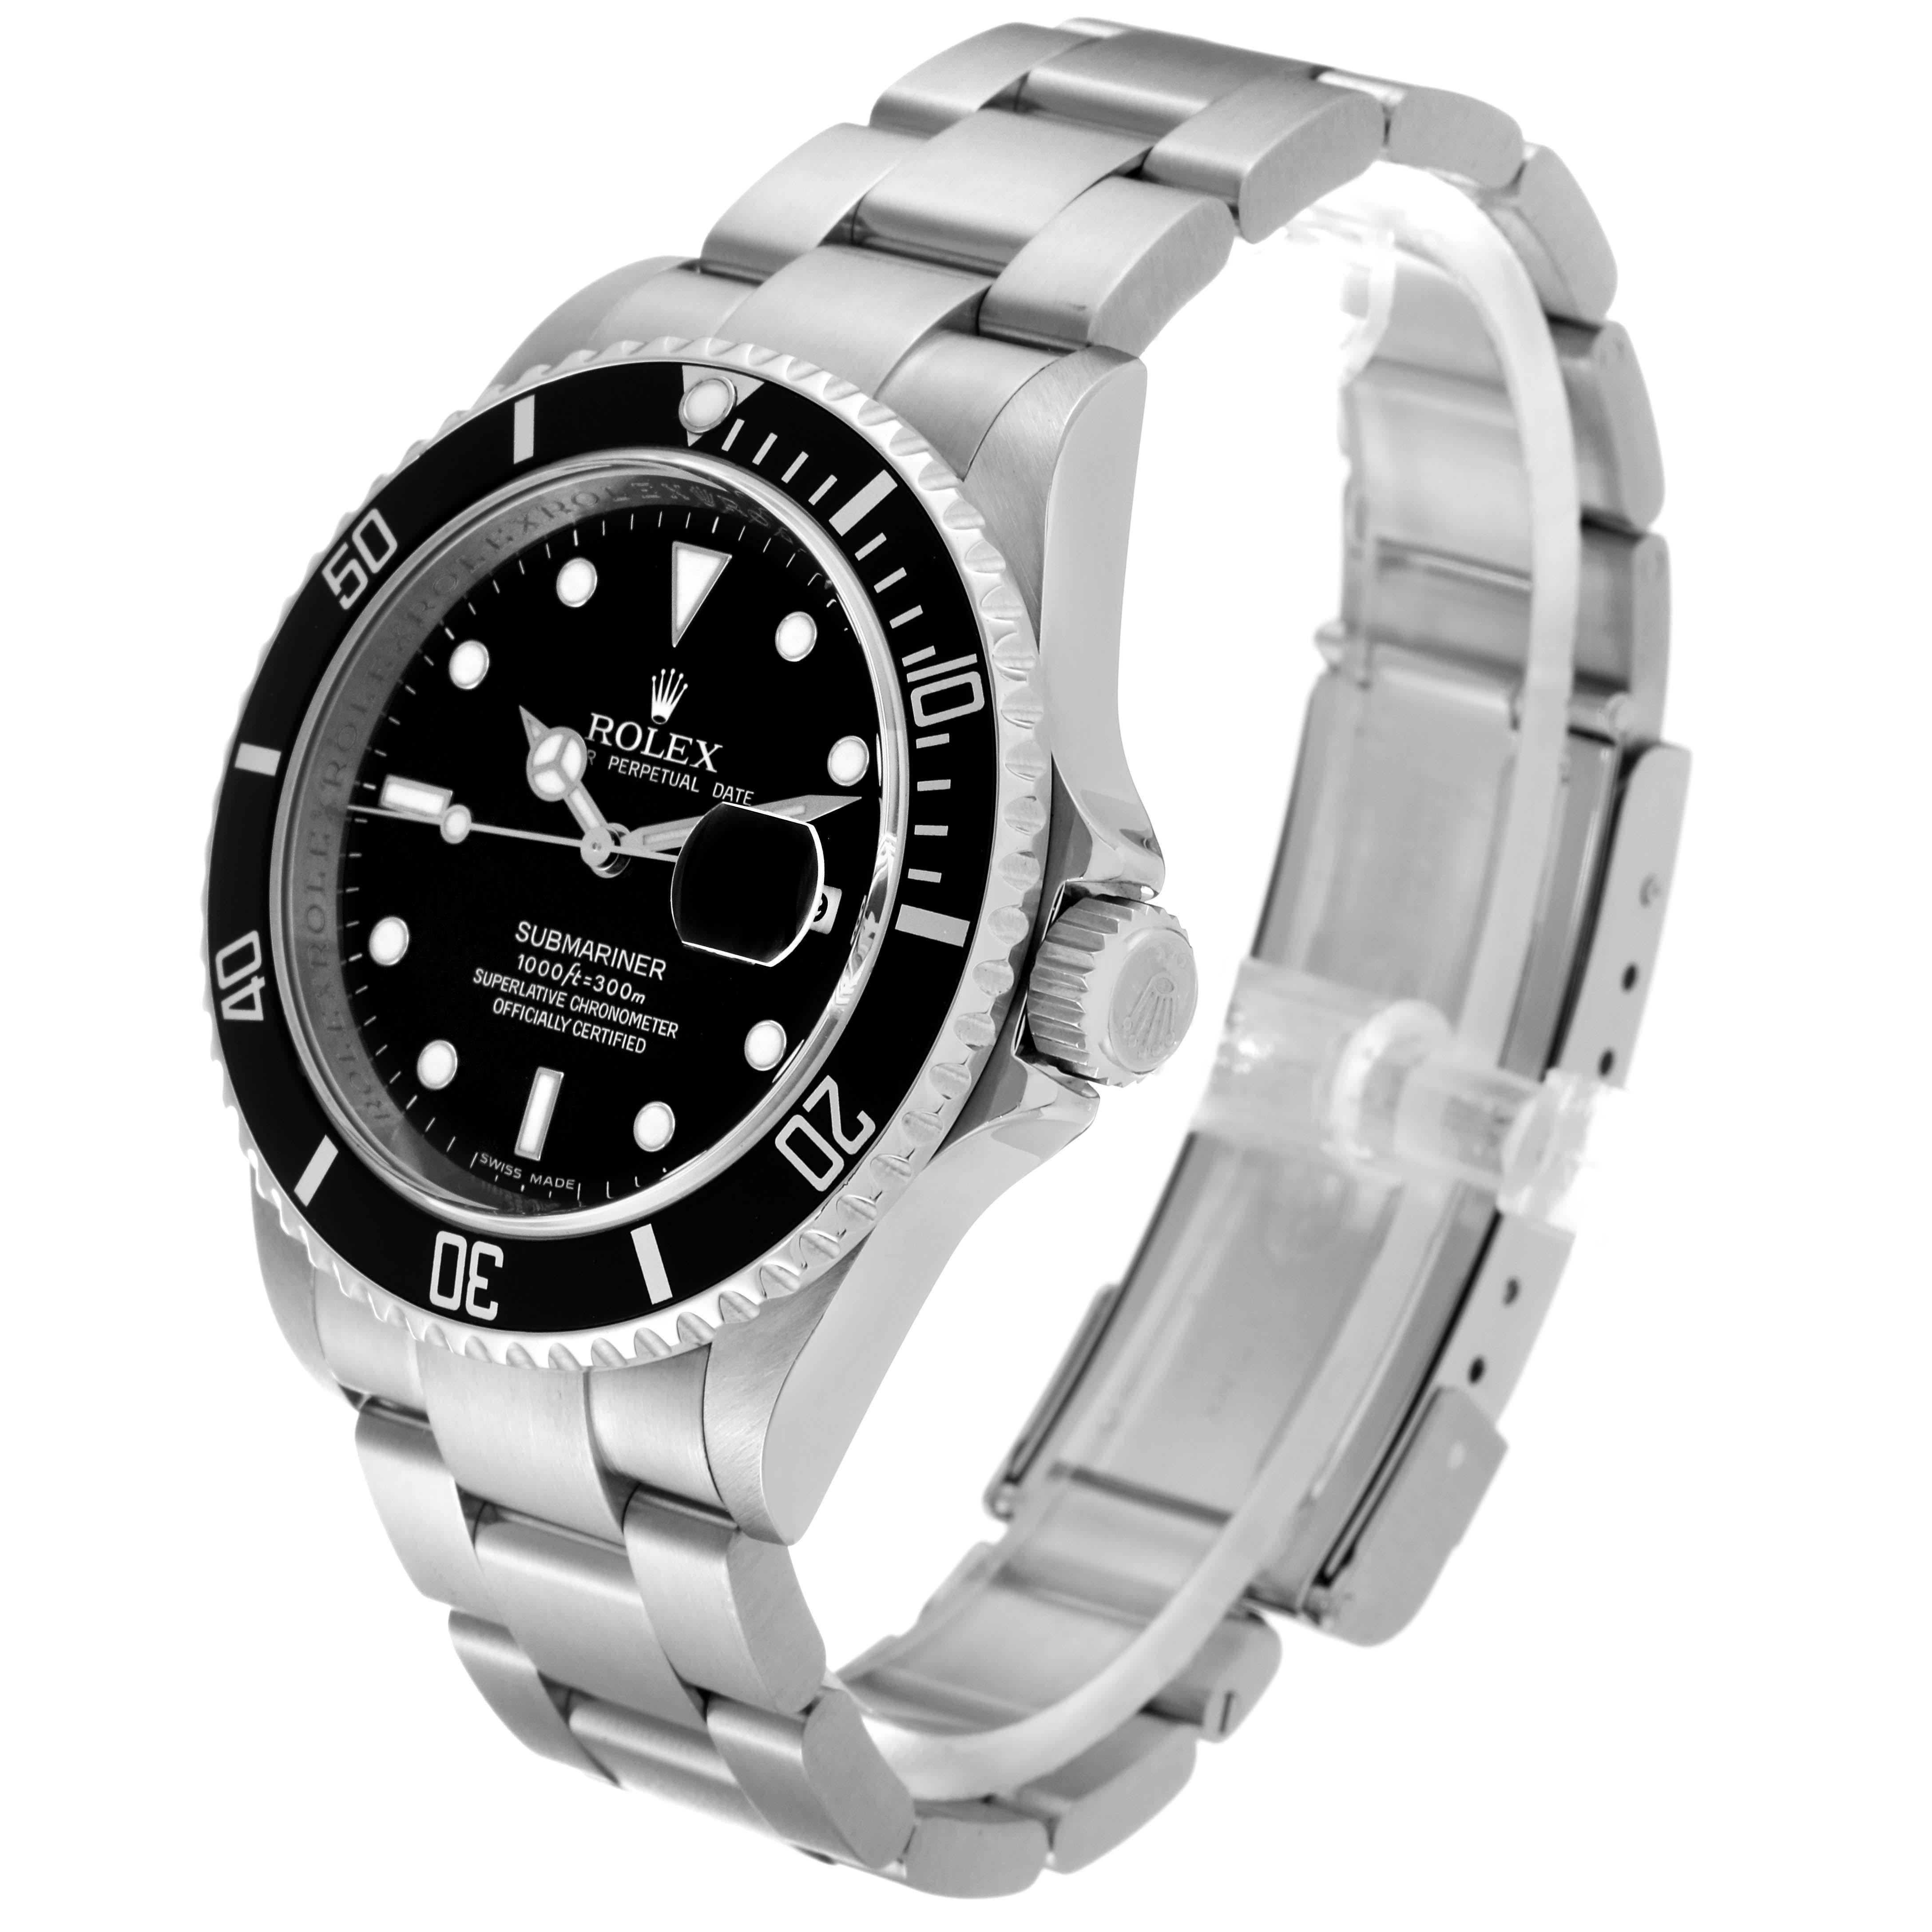 Rolex Submariner Date Black Dial Steel Mens Watch 16610 Box Card For Sale 1